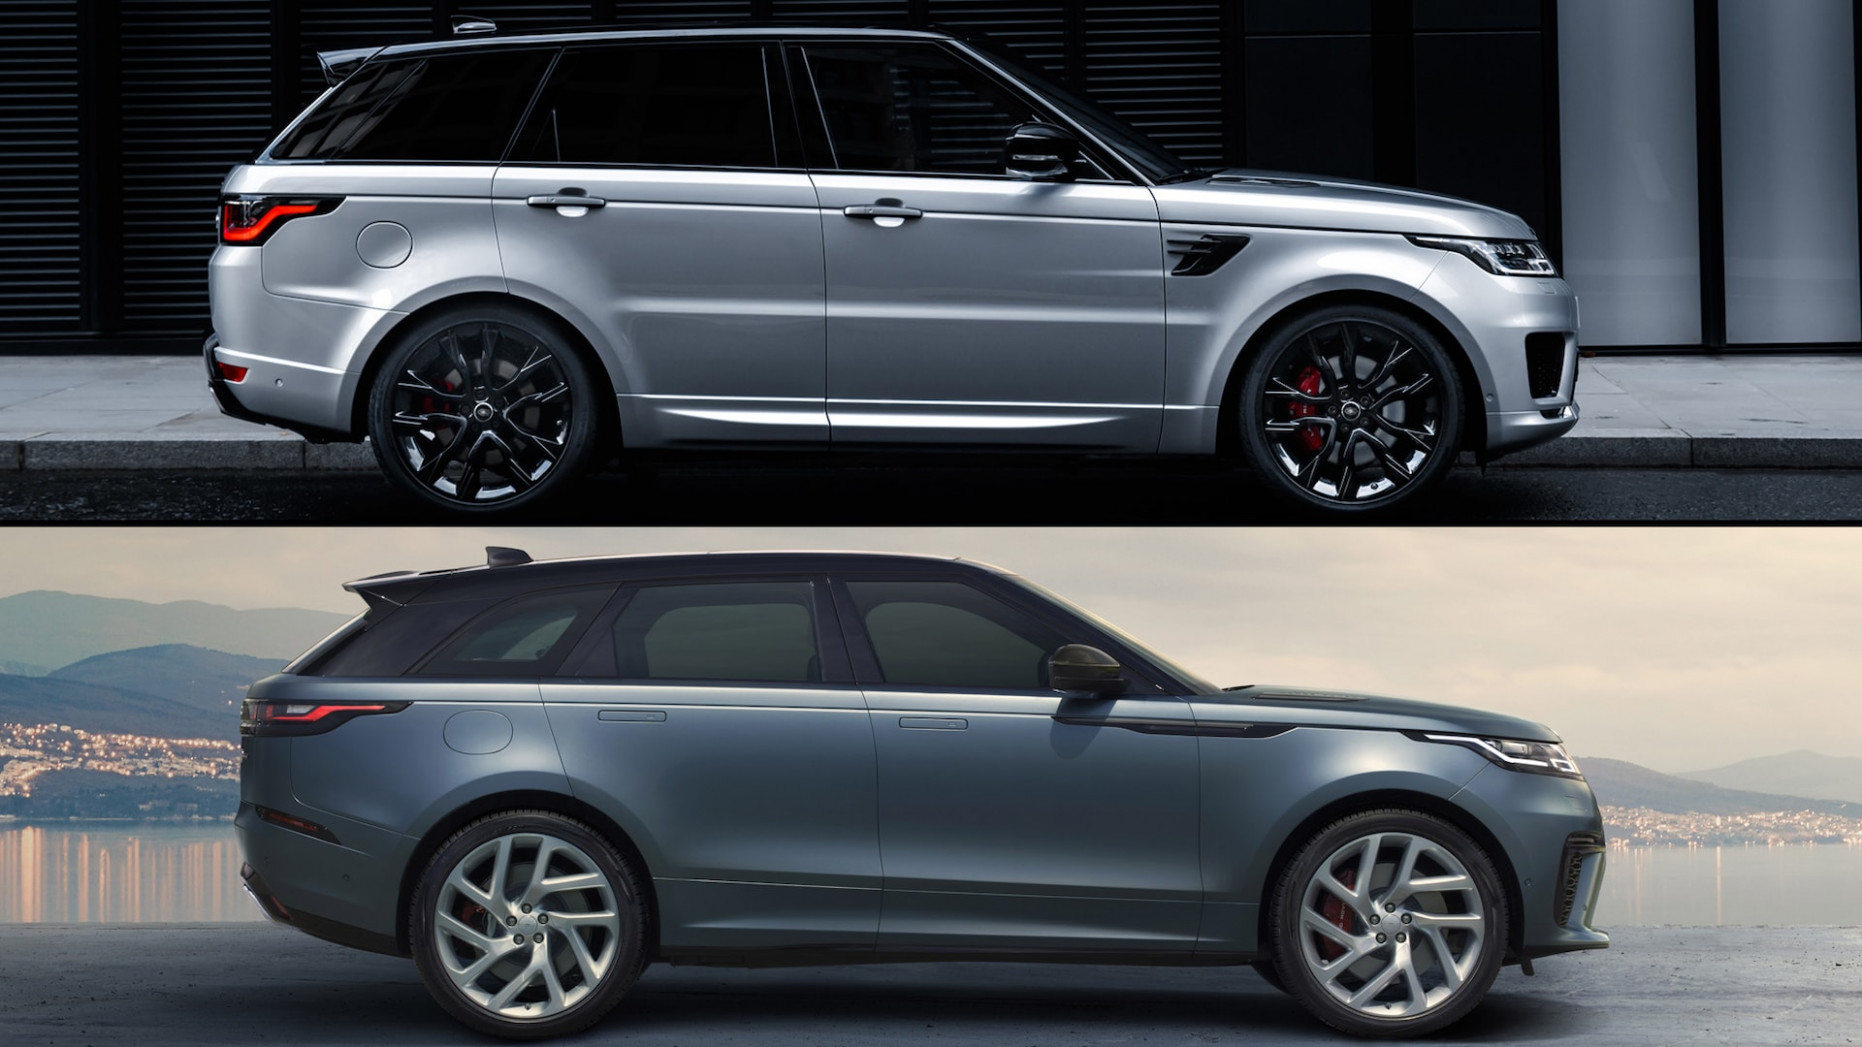 What Is The Difference Between A Range Rover Velar And Sport? Range Rover Velar Length